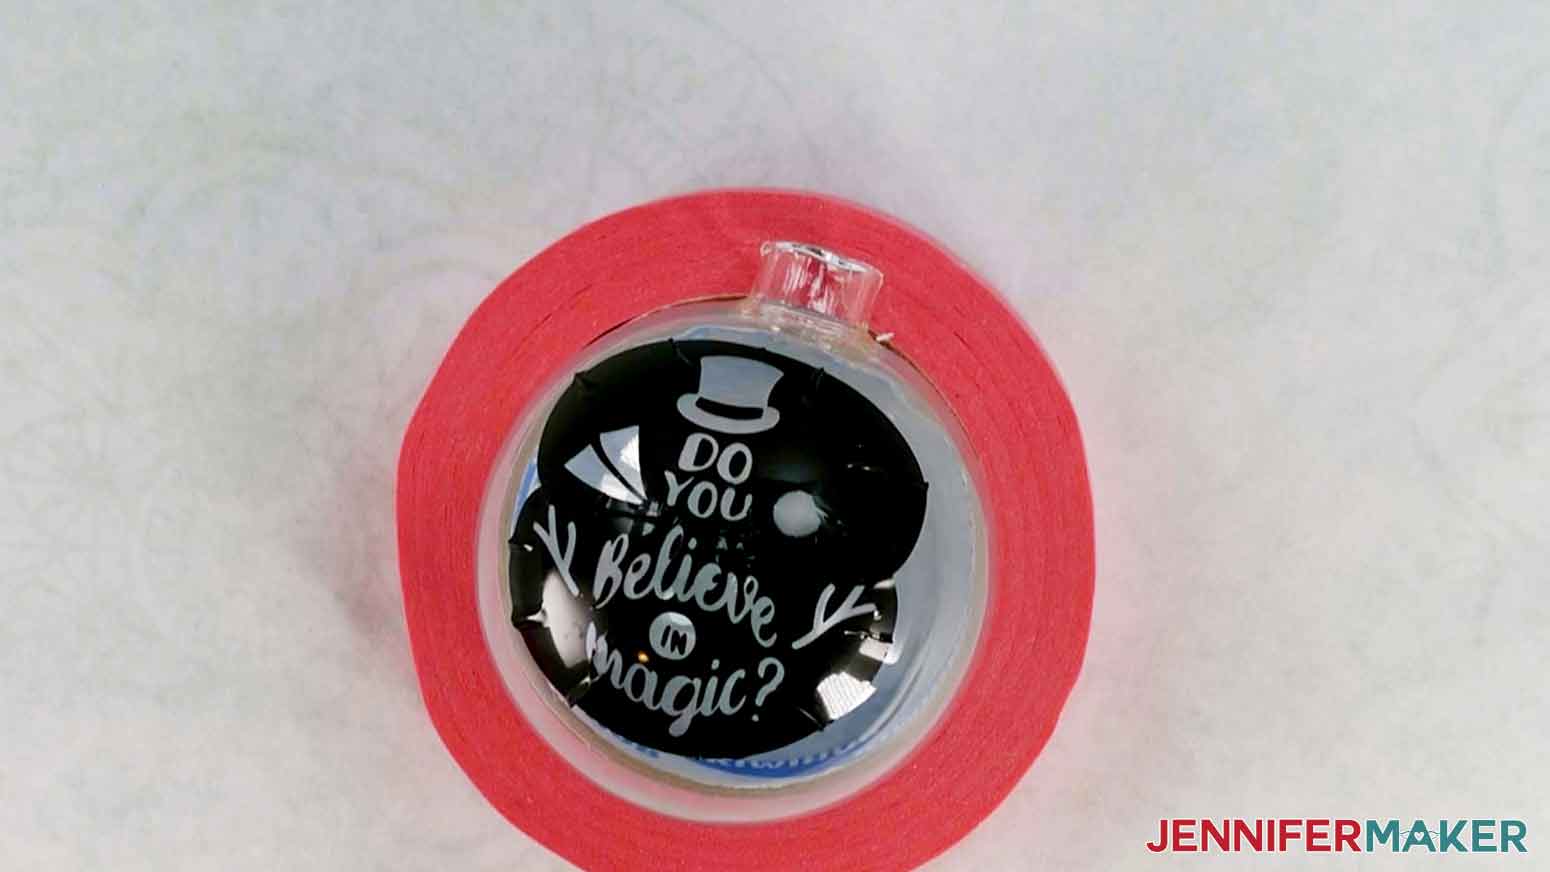 A glass ornament placed in a painter's tape roll with two pieces of black vinyl applied to the surface. The vinyl pieces are overlapping in the center and have a snowman design cut out of them.